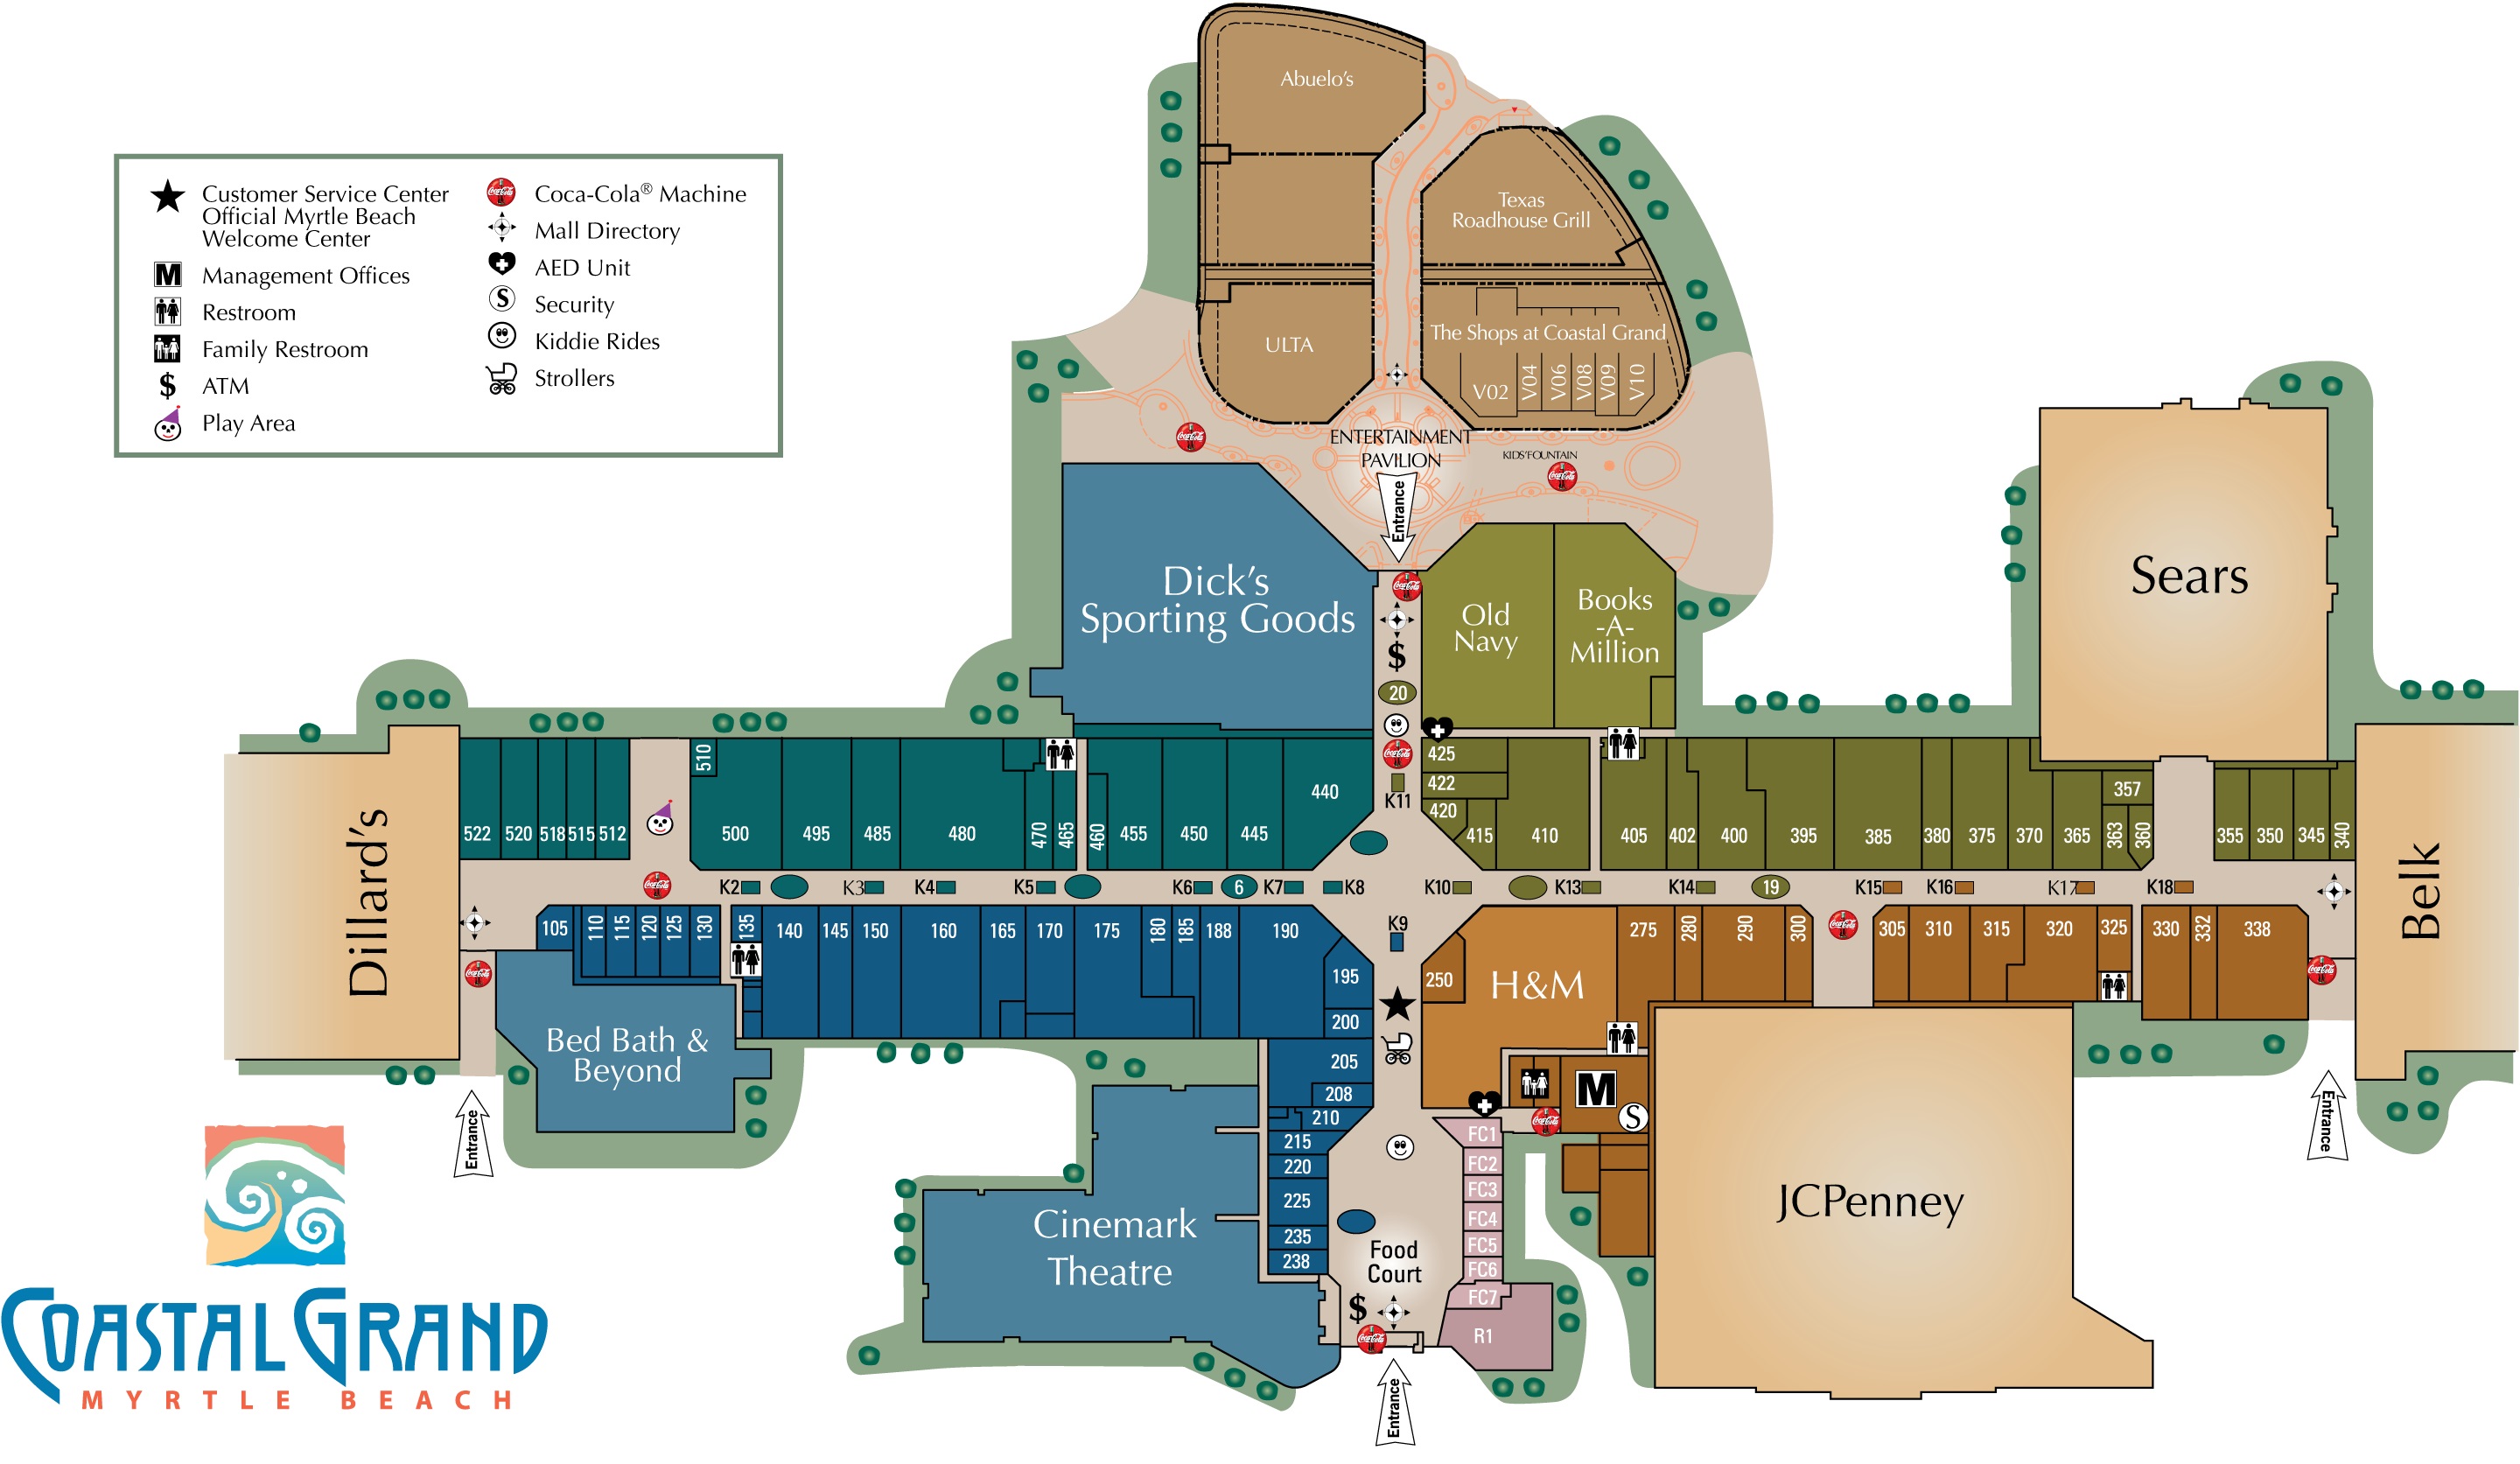 Coastal Grand Mall (140 stores) - shopping in Myrtle Beach, South ...